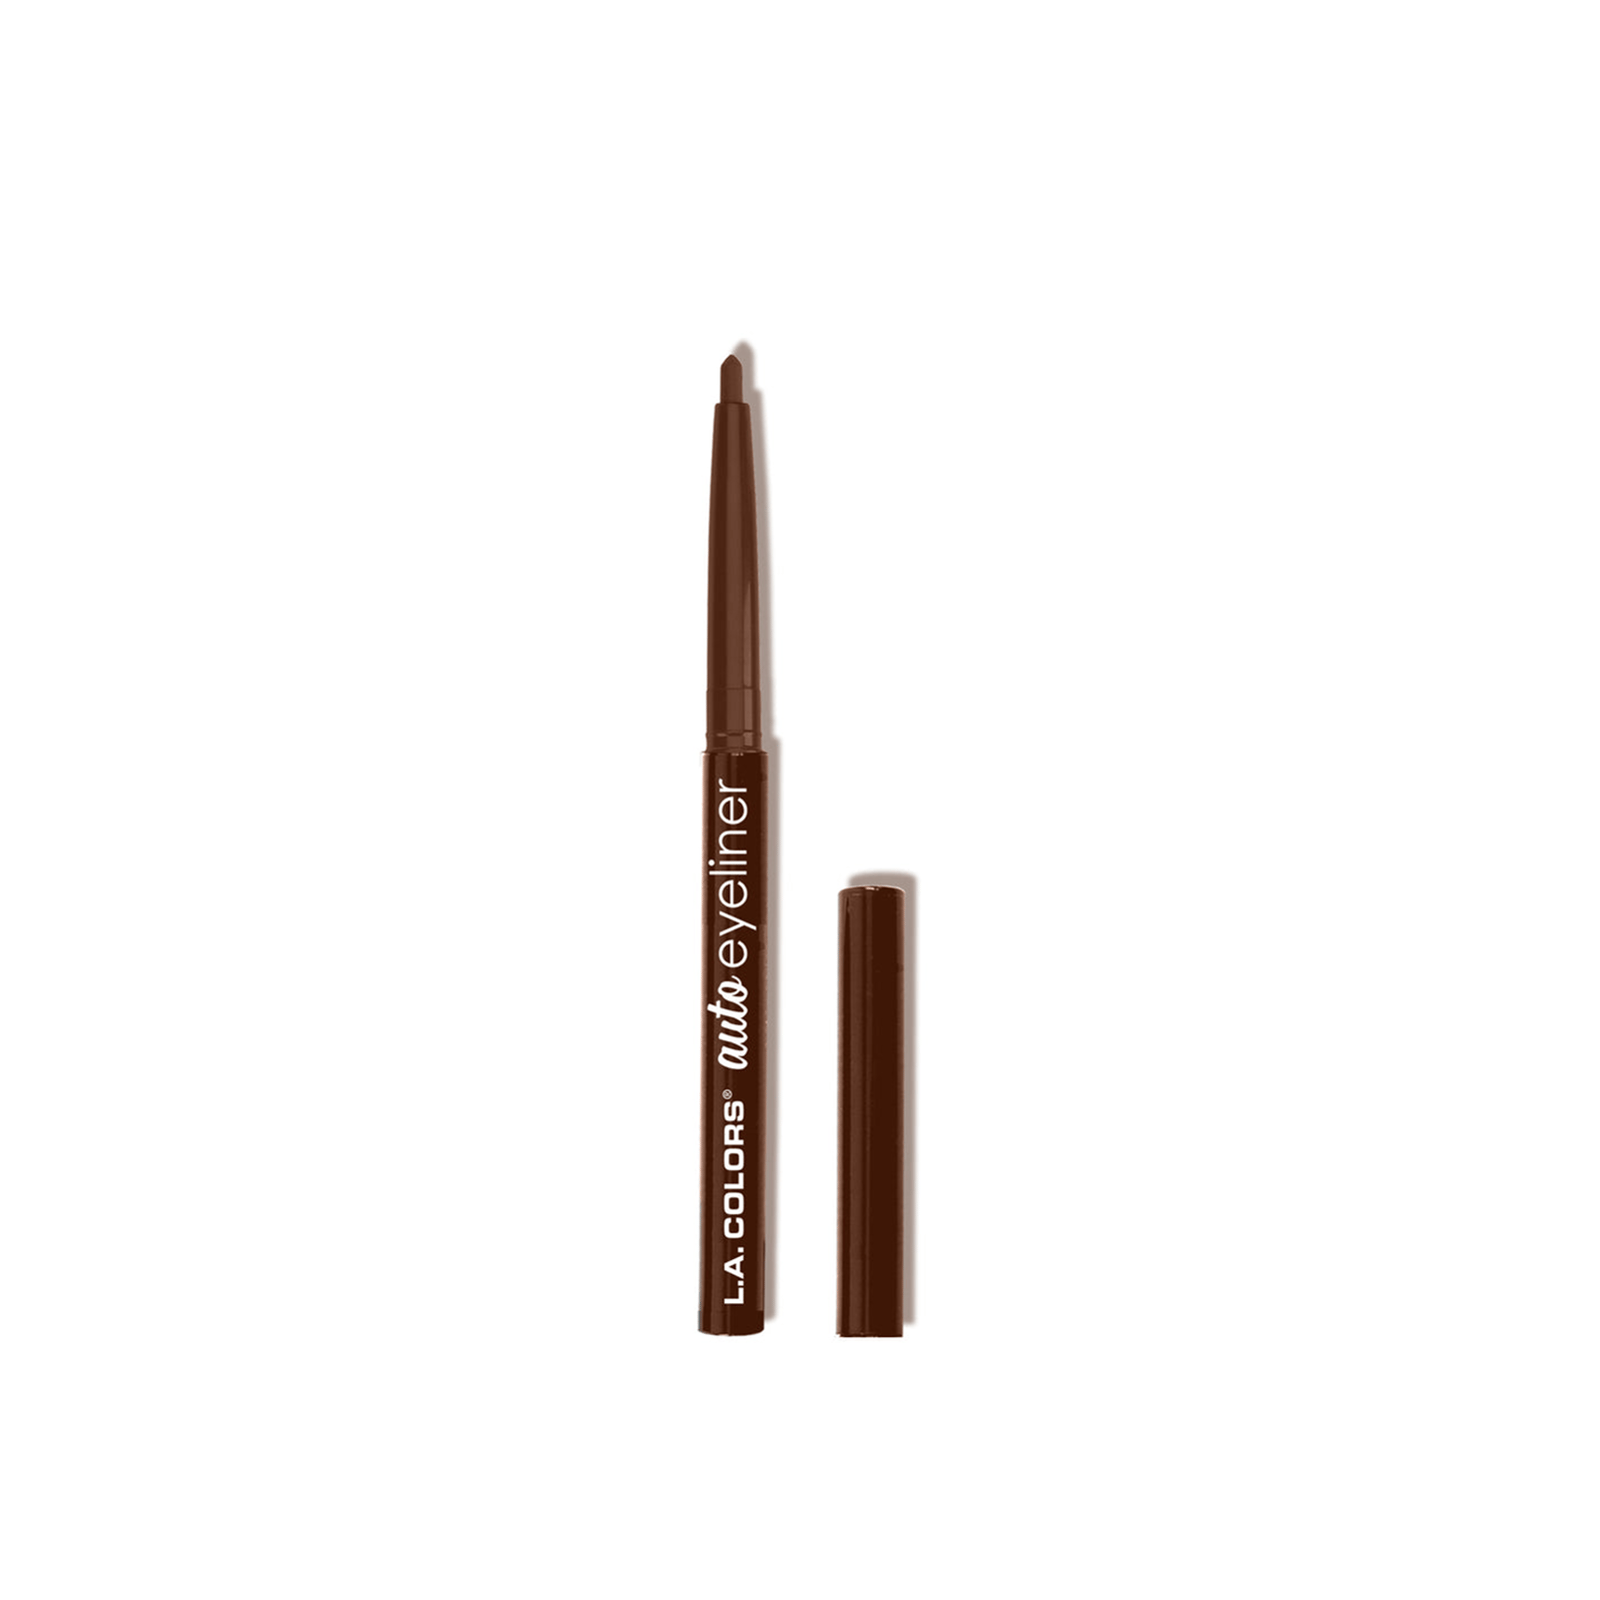 L.A. Colors Auto Eyeliner CAE663A Brown 0.3g (0.01 oz)